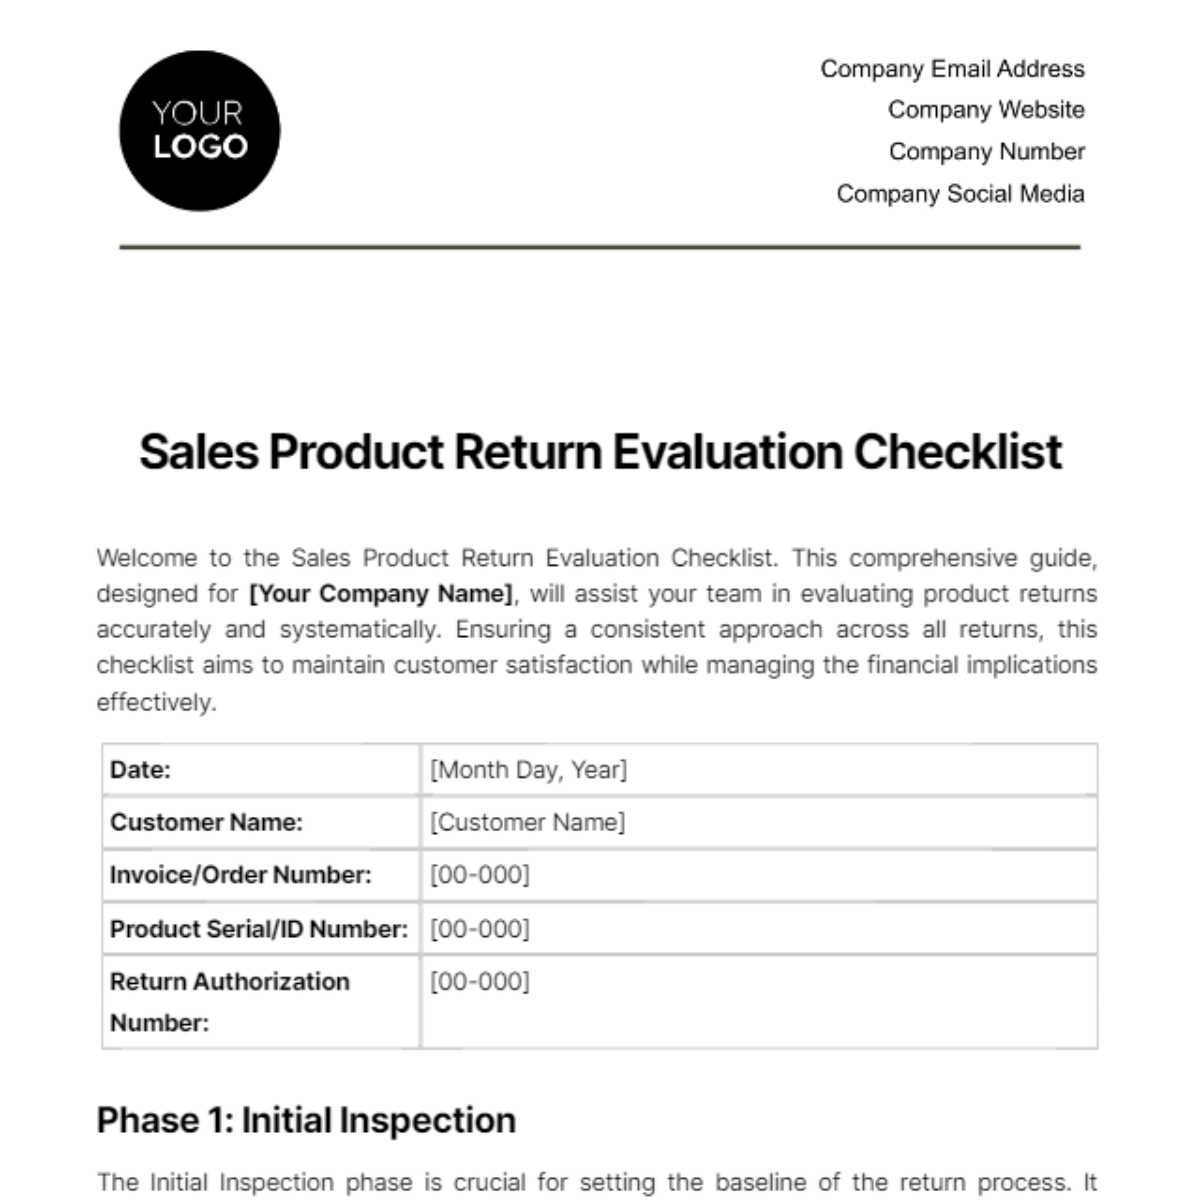 Sales Product Return Evaluation Checklist Template